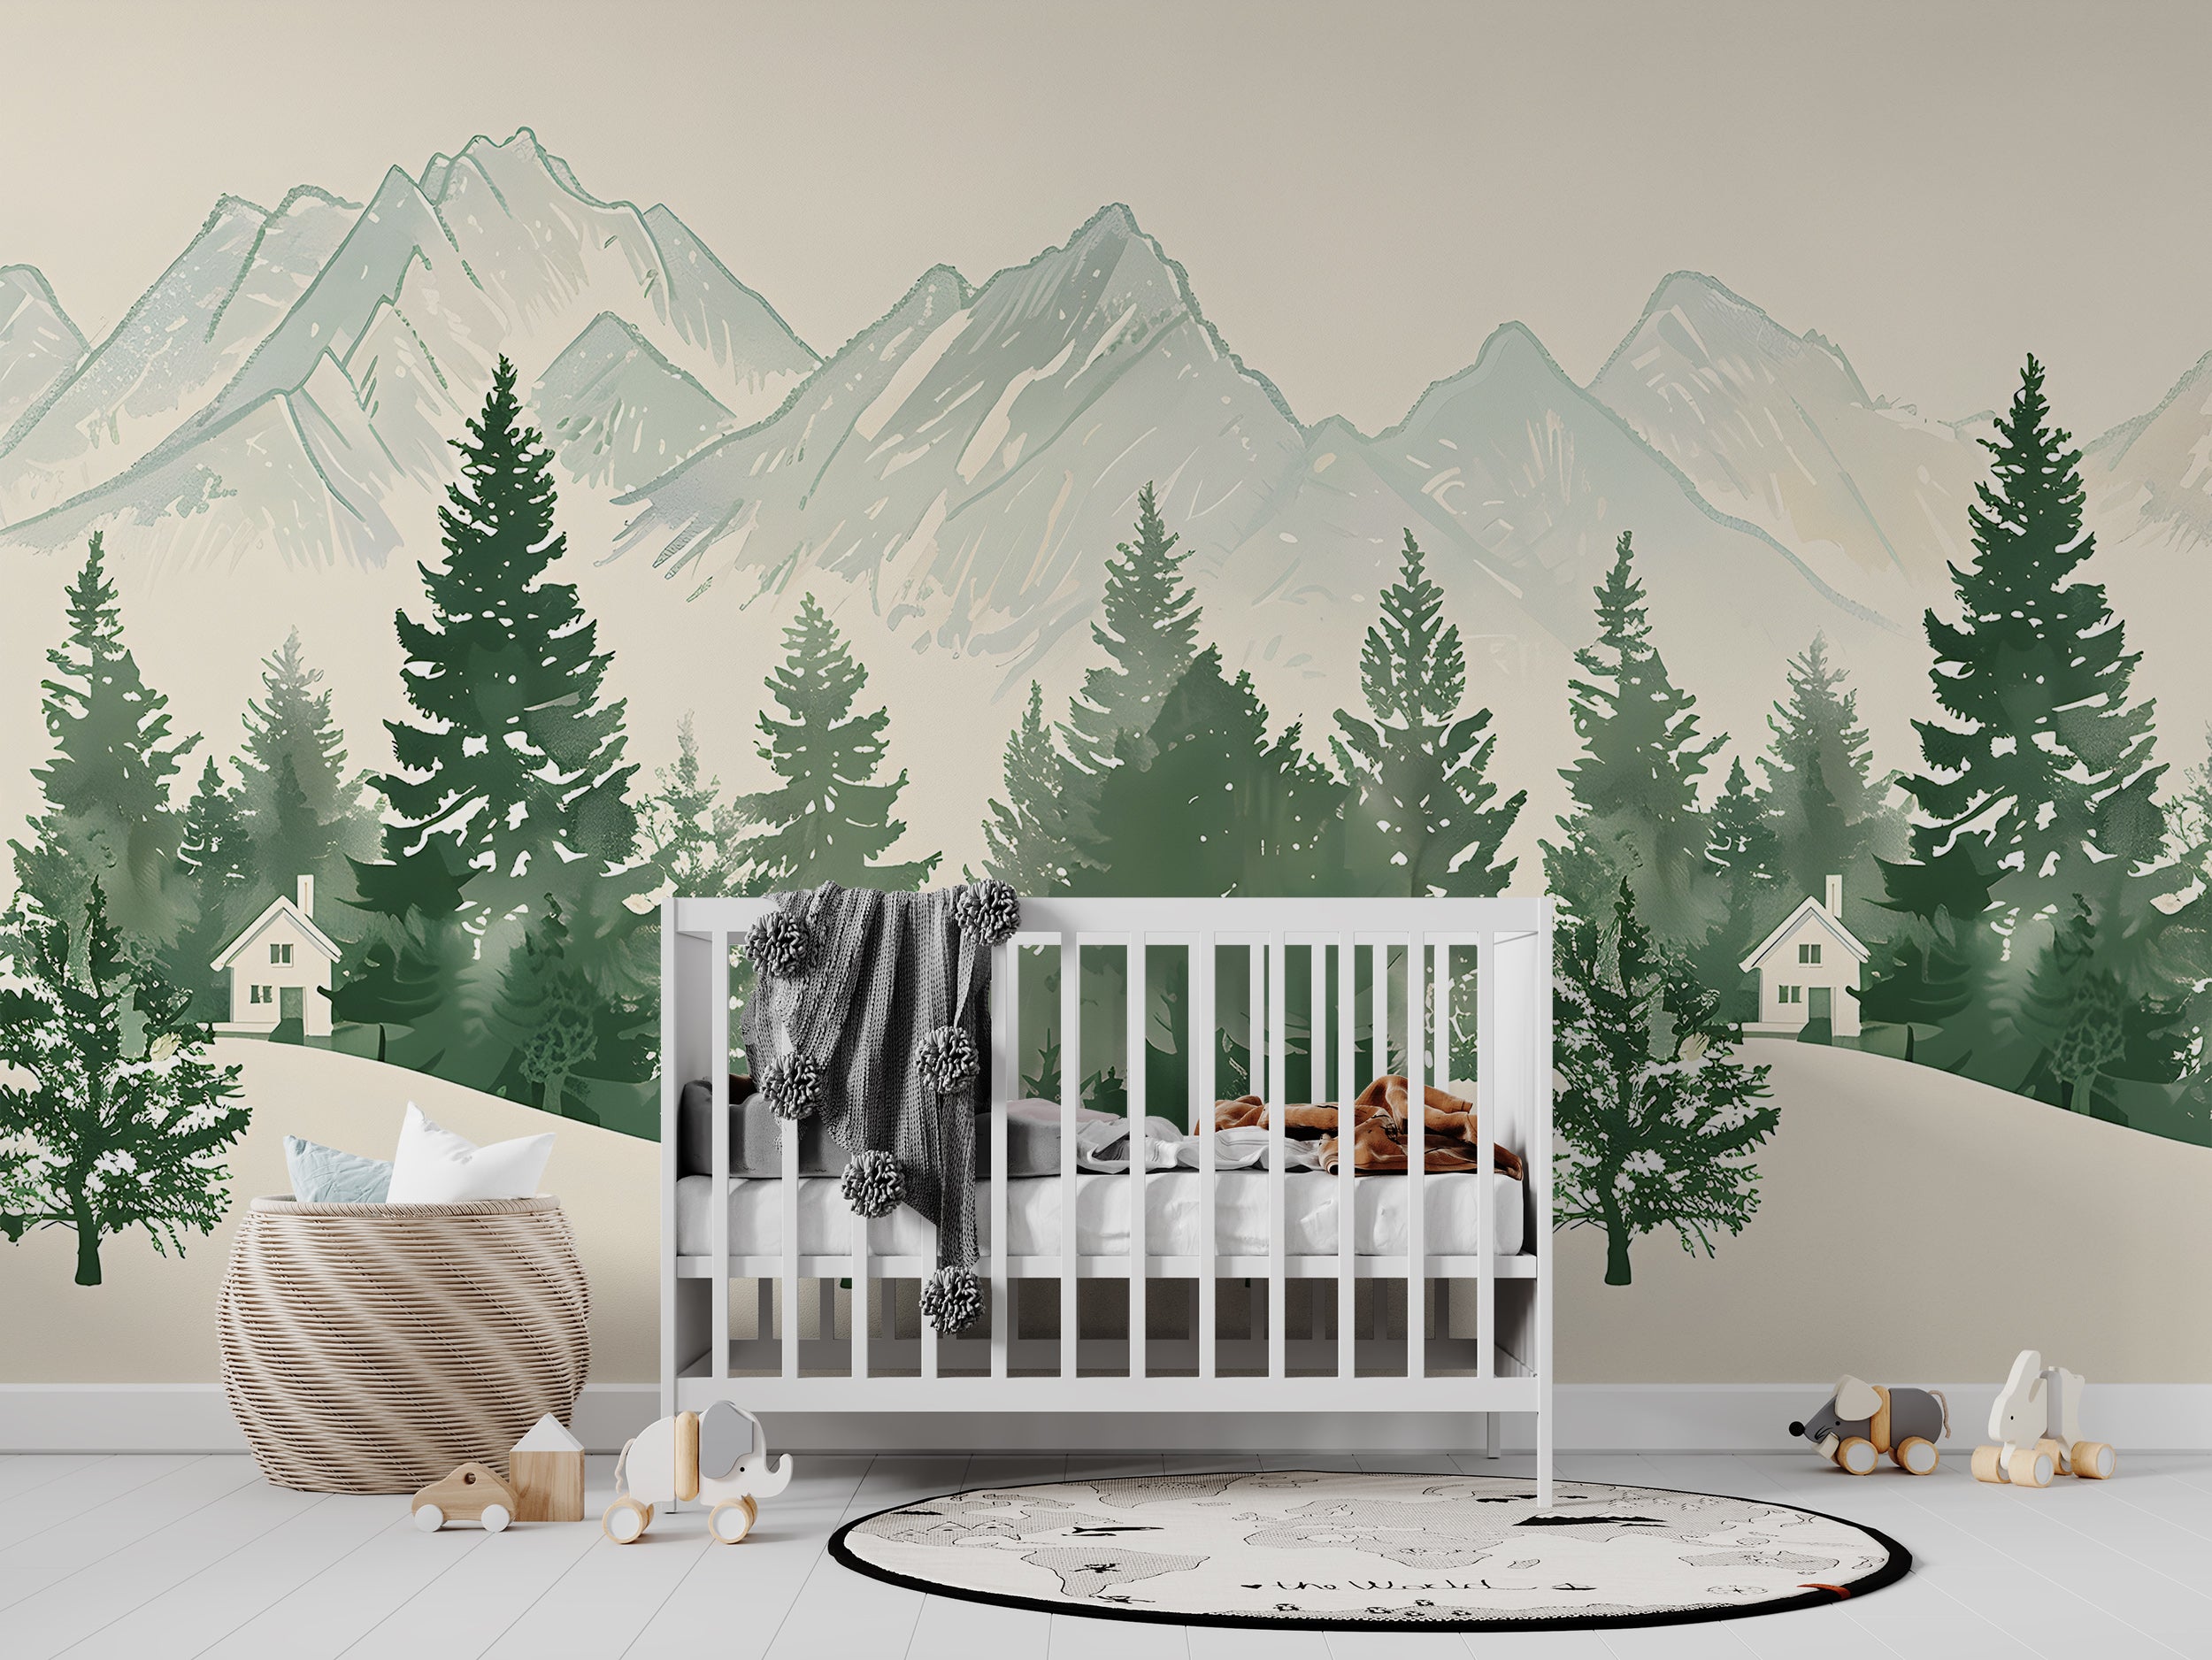 Monochrome Mountains and Forest Mural, Green and White Landscape Wallpaper, Self-adhesive Seamless Mountain Pattern, Removable Nature Decal